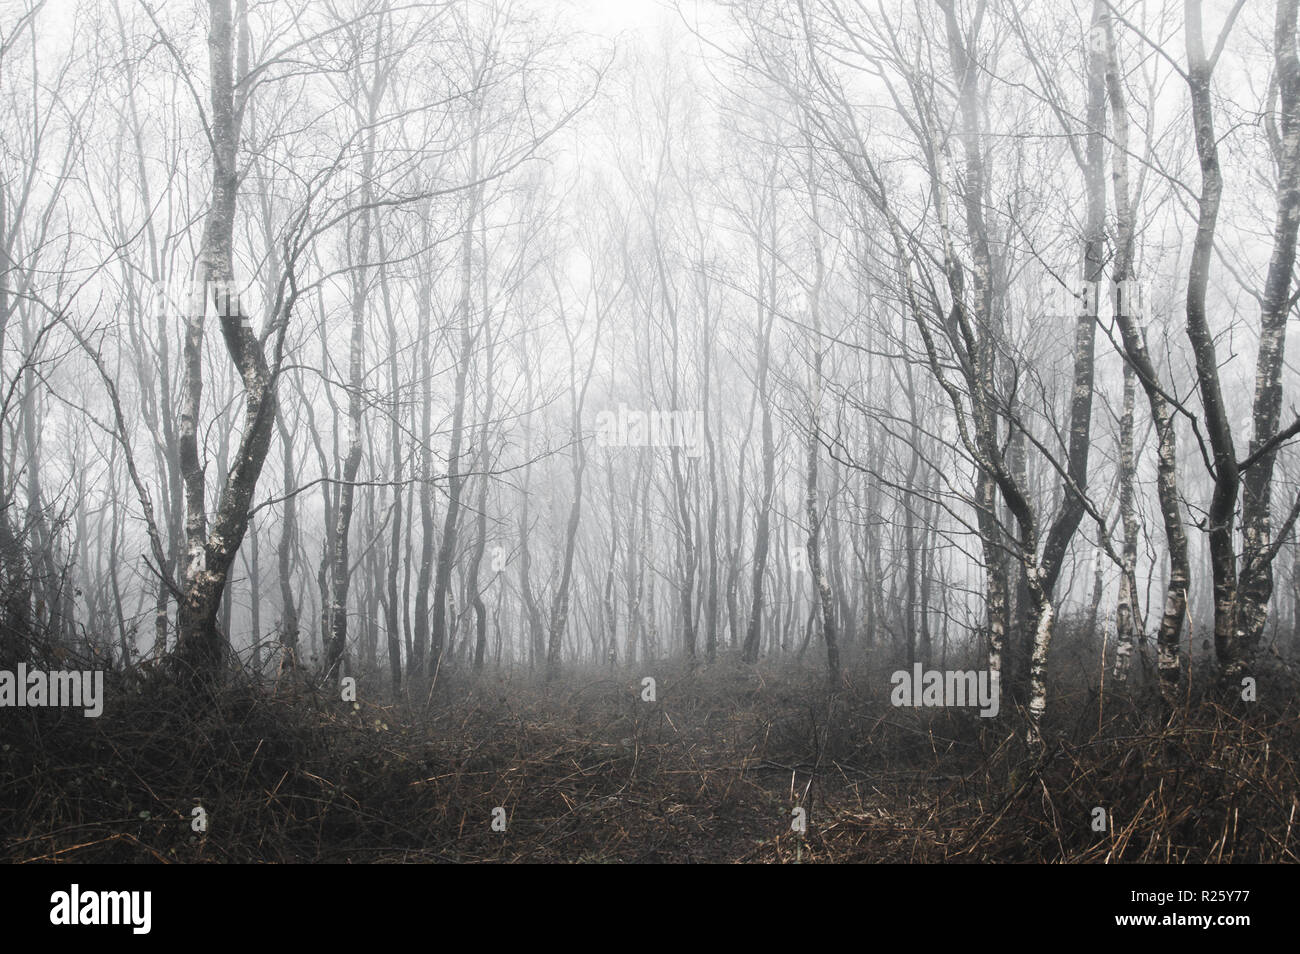 A spooky forest of birch trees on a foggy winters day. With a cold, muted edit Stock Photo